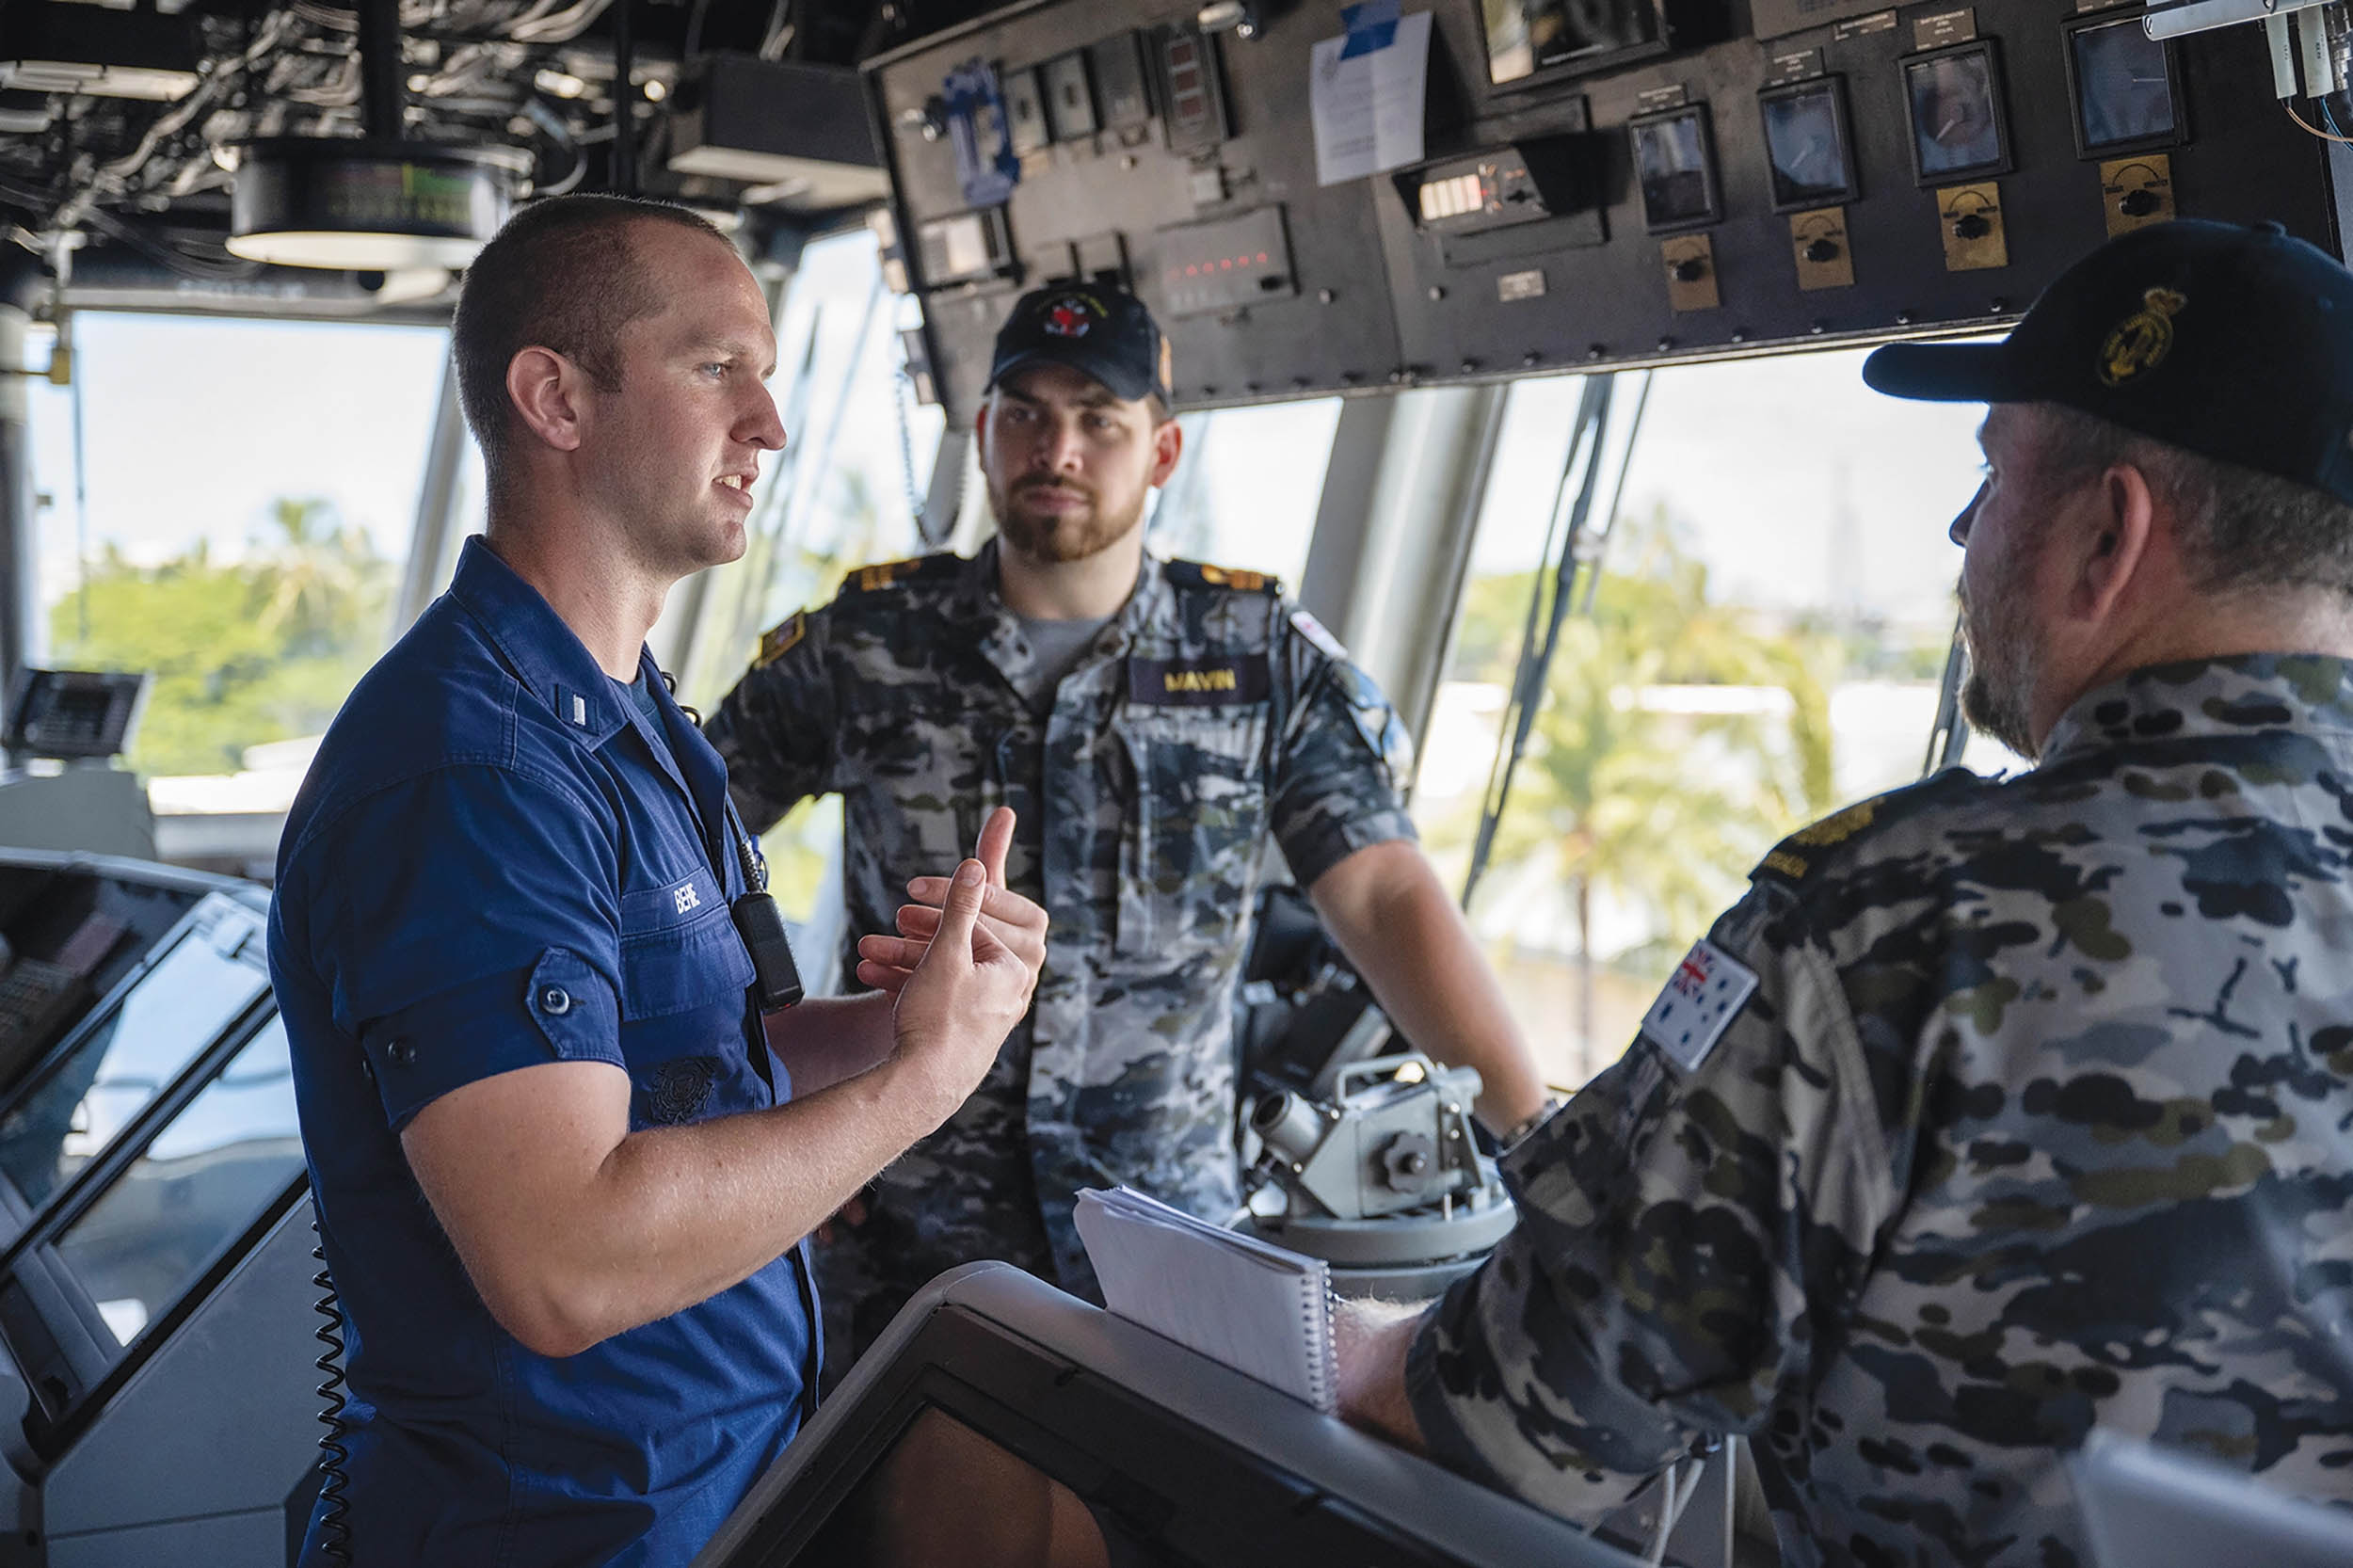 Assistant operations officer talks about Coast Guard missions during visit to Midgett in Honolulu, Hawaii